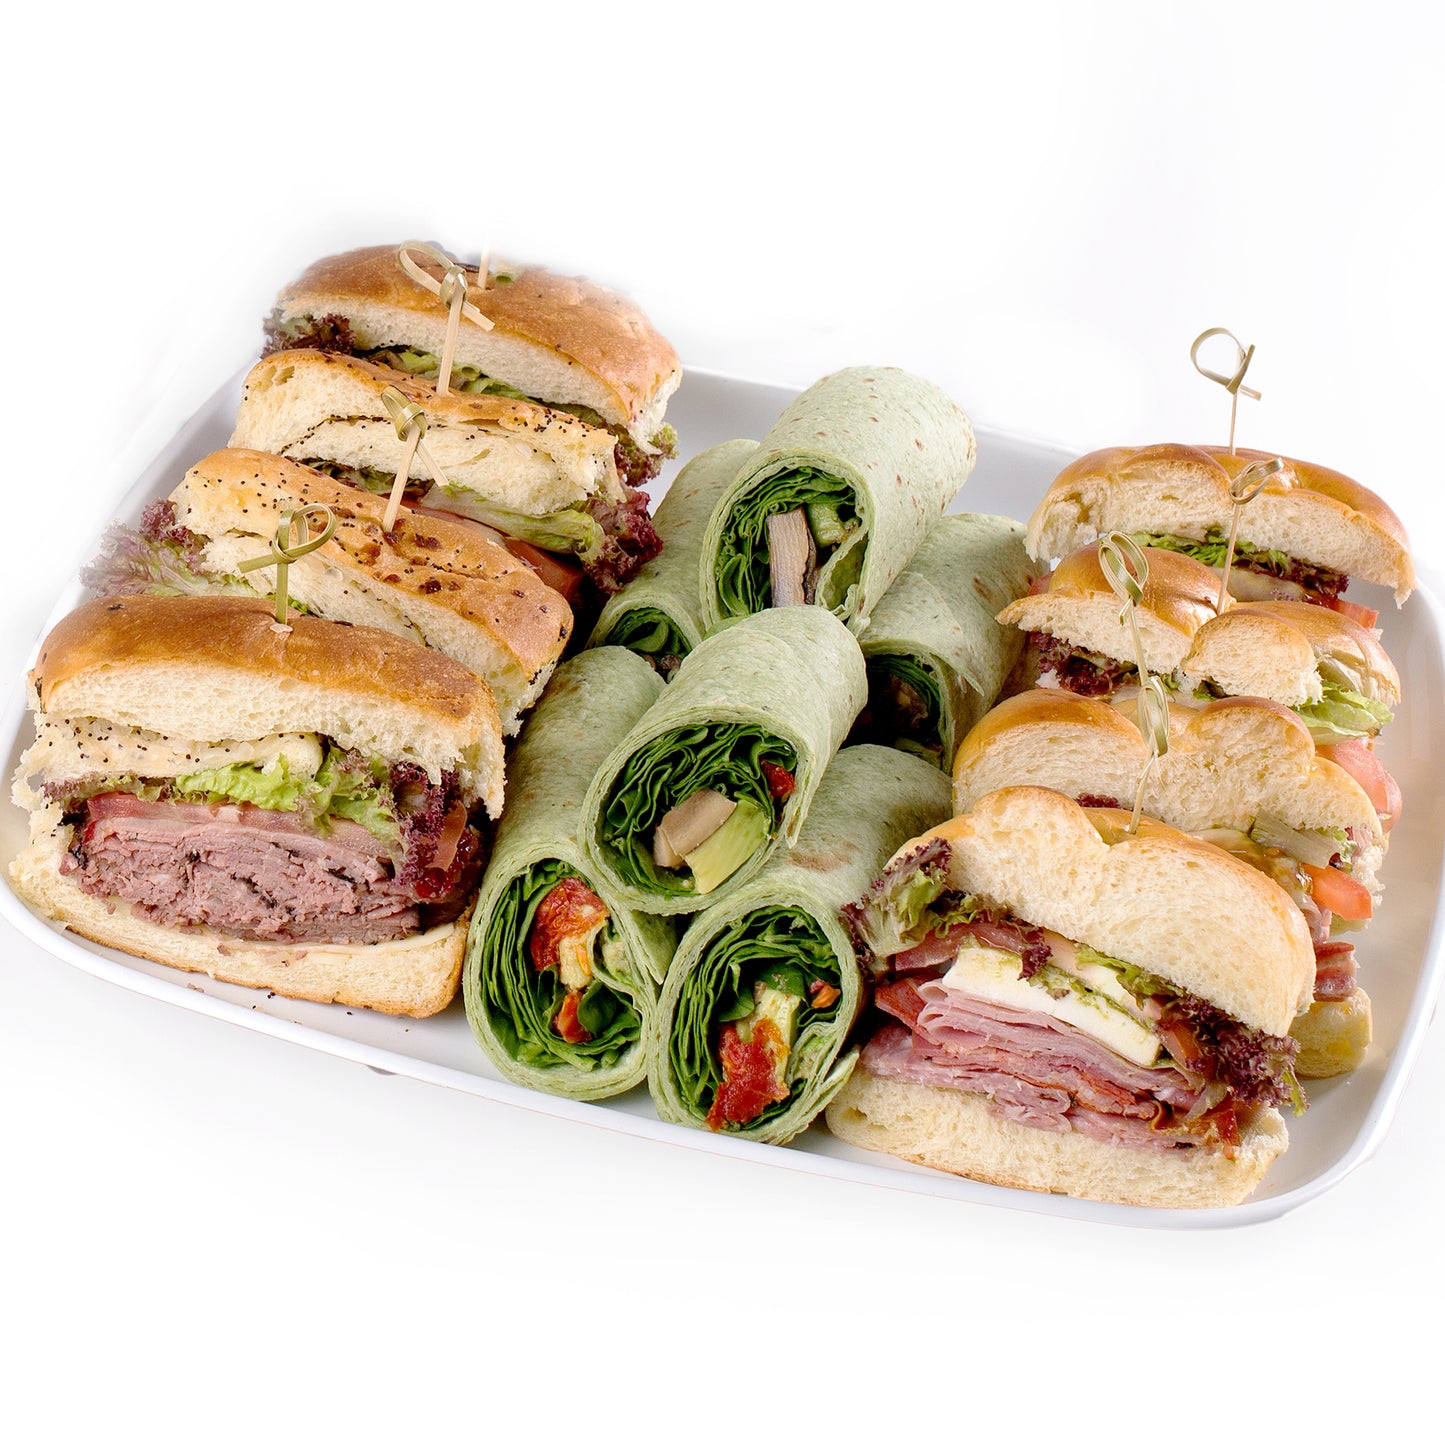 KEEP IT SIMPLE SANDWICH PLATTER Delivered To your Party Or Office